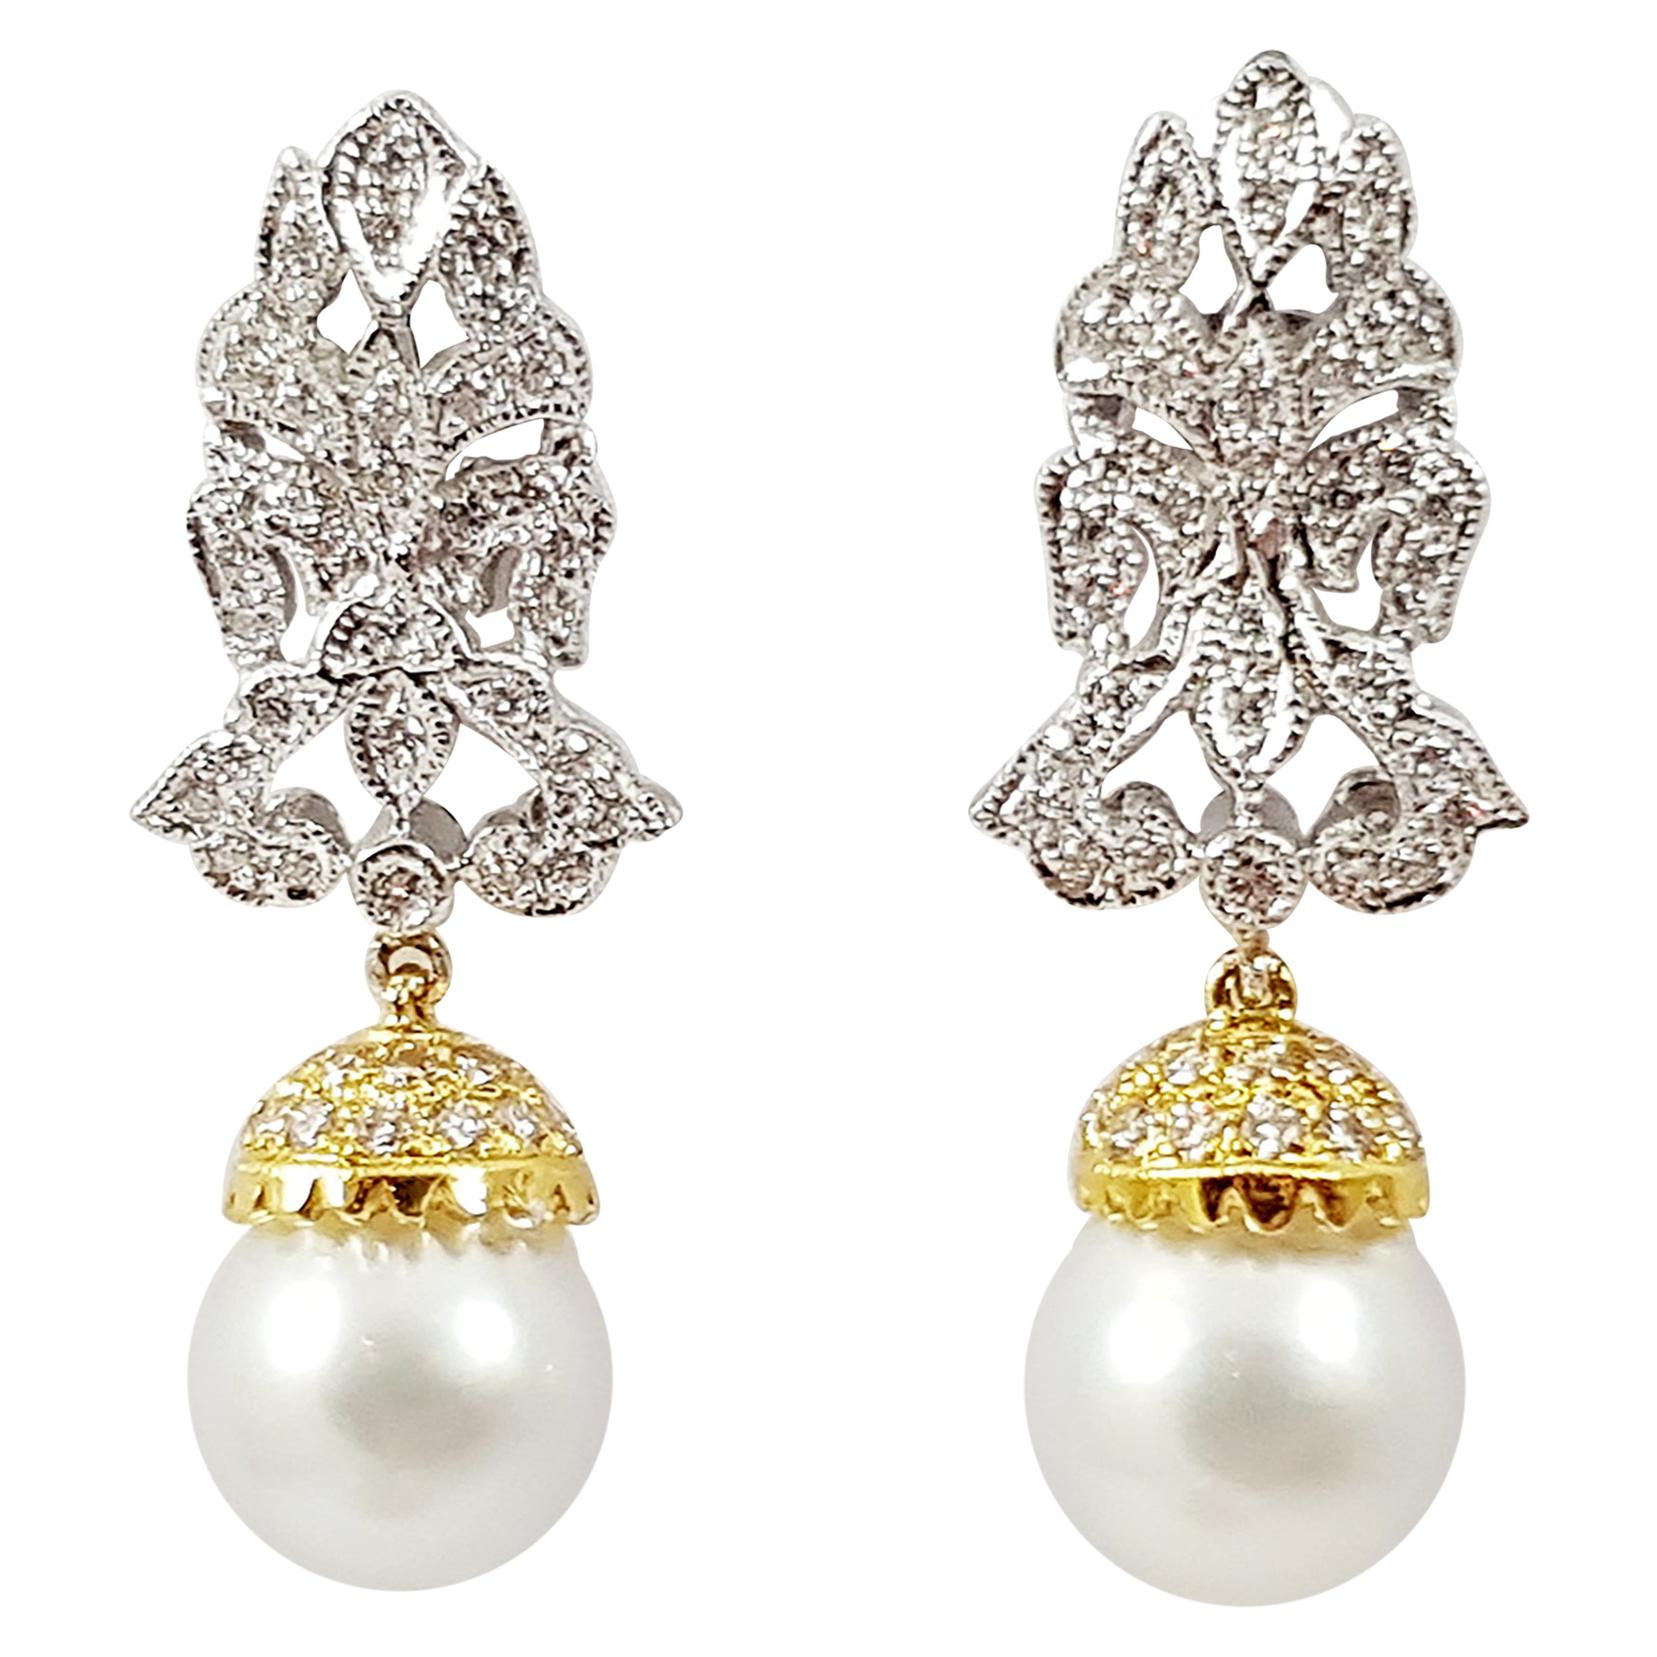 South Sea Pearl with Diamond and Brown Diamond Earrings in 18 Karat White Gold